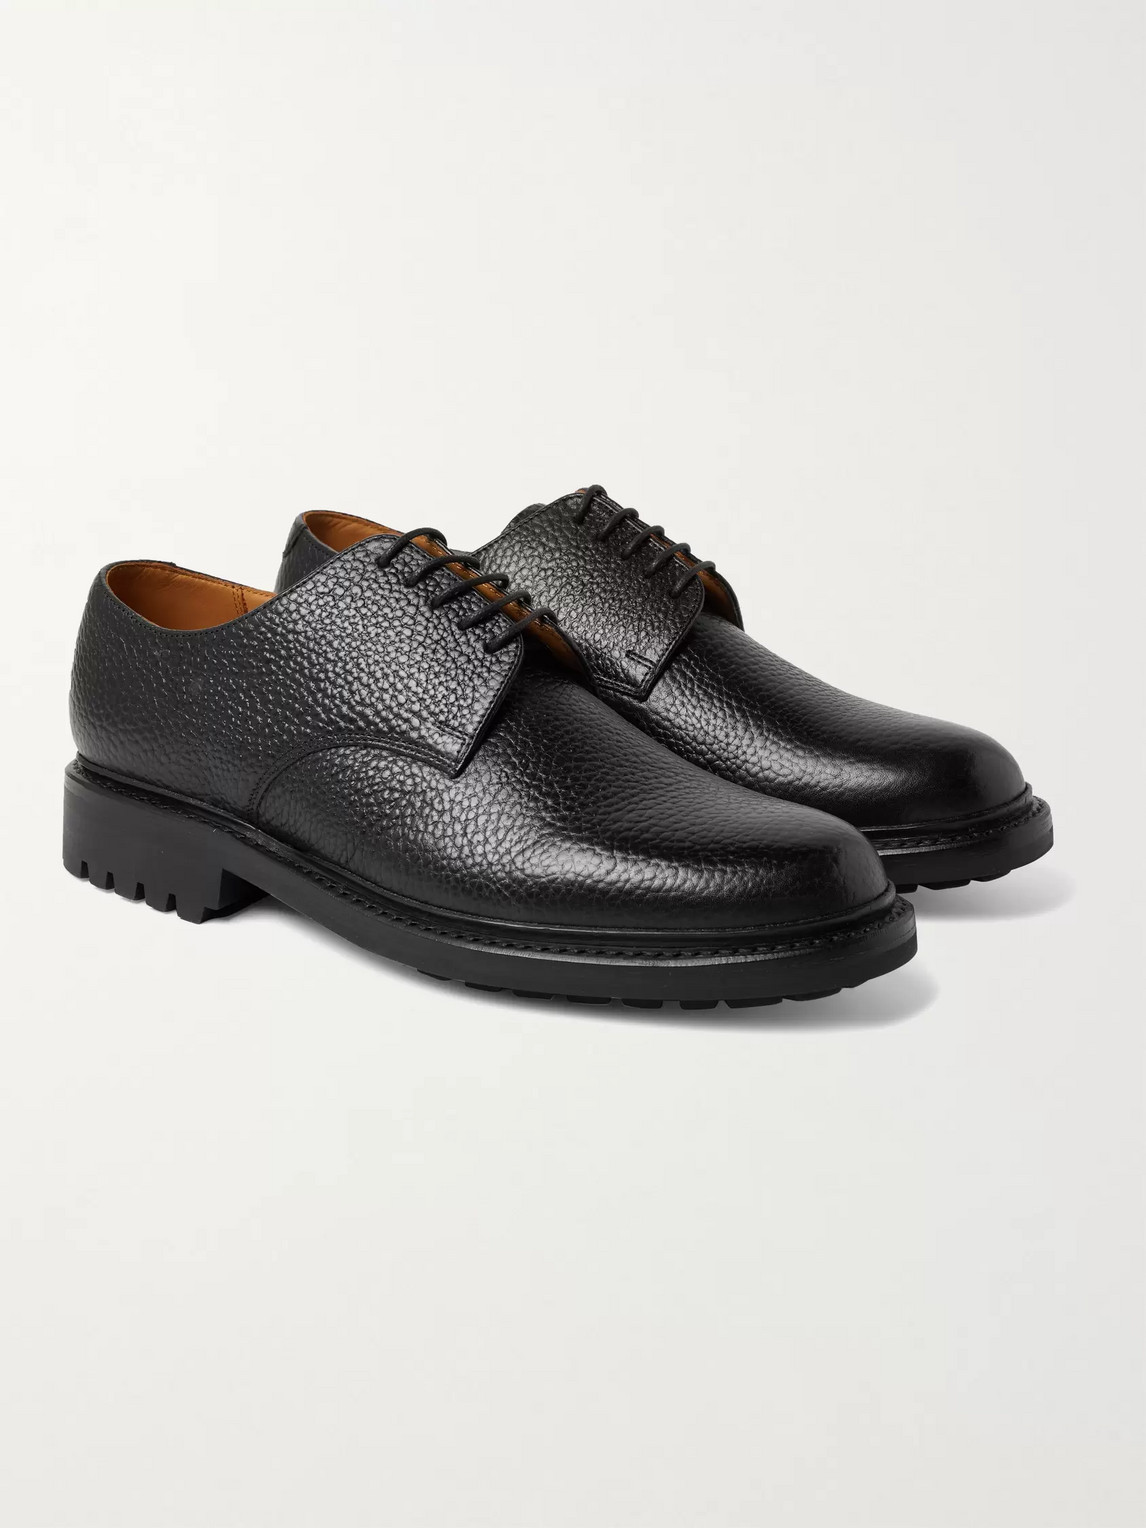 GRENSON CURT FULL-GRAIN LEATHER DERBY SHOES